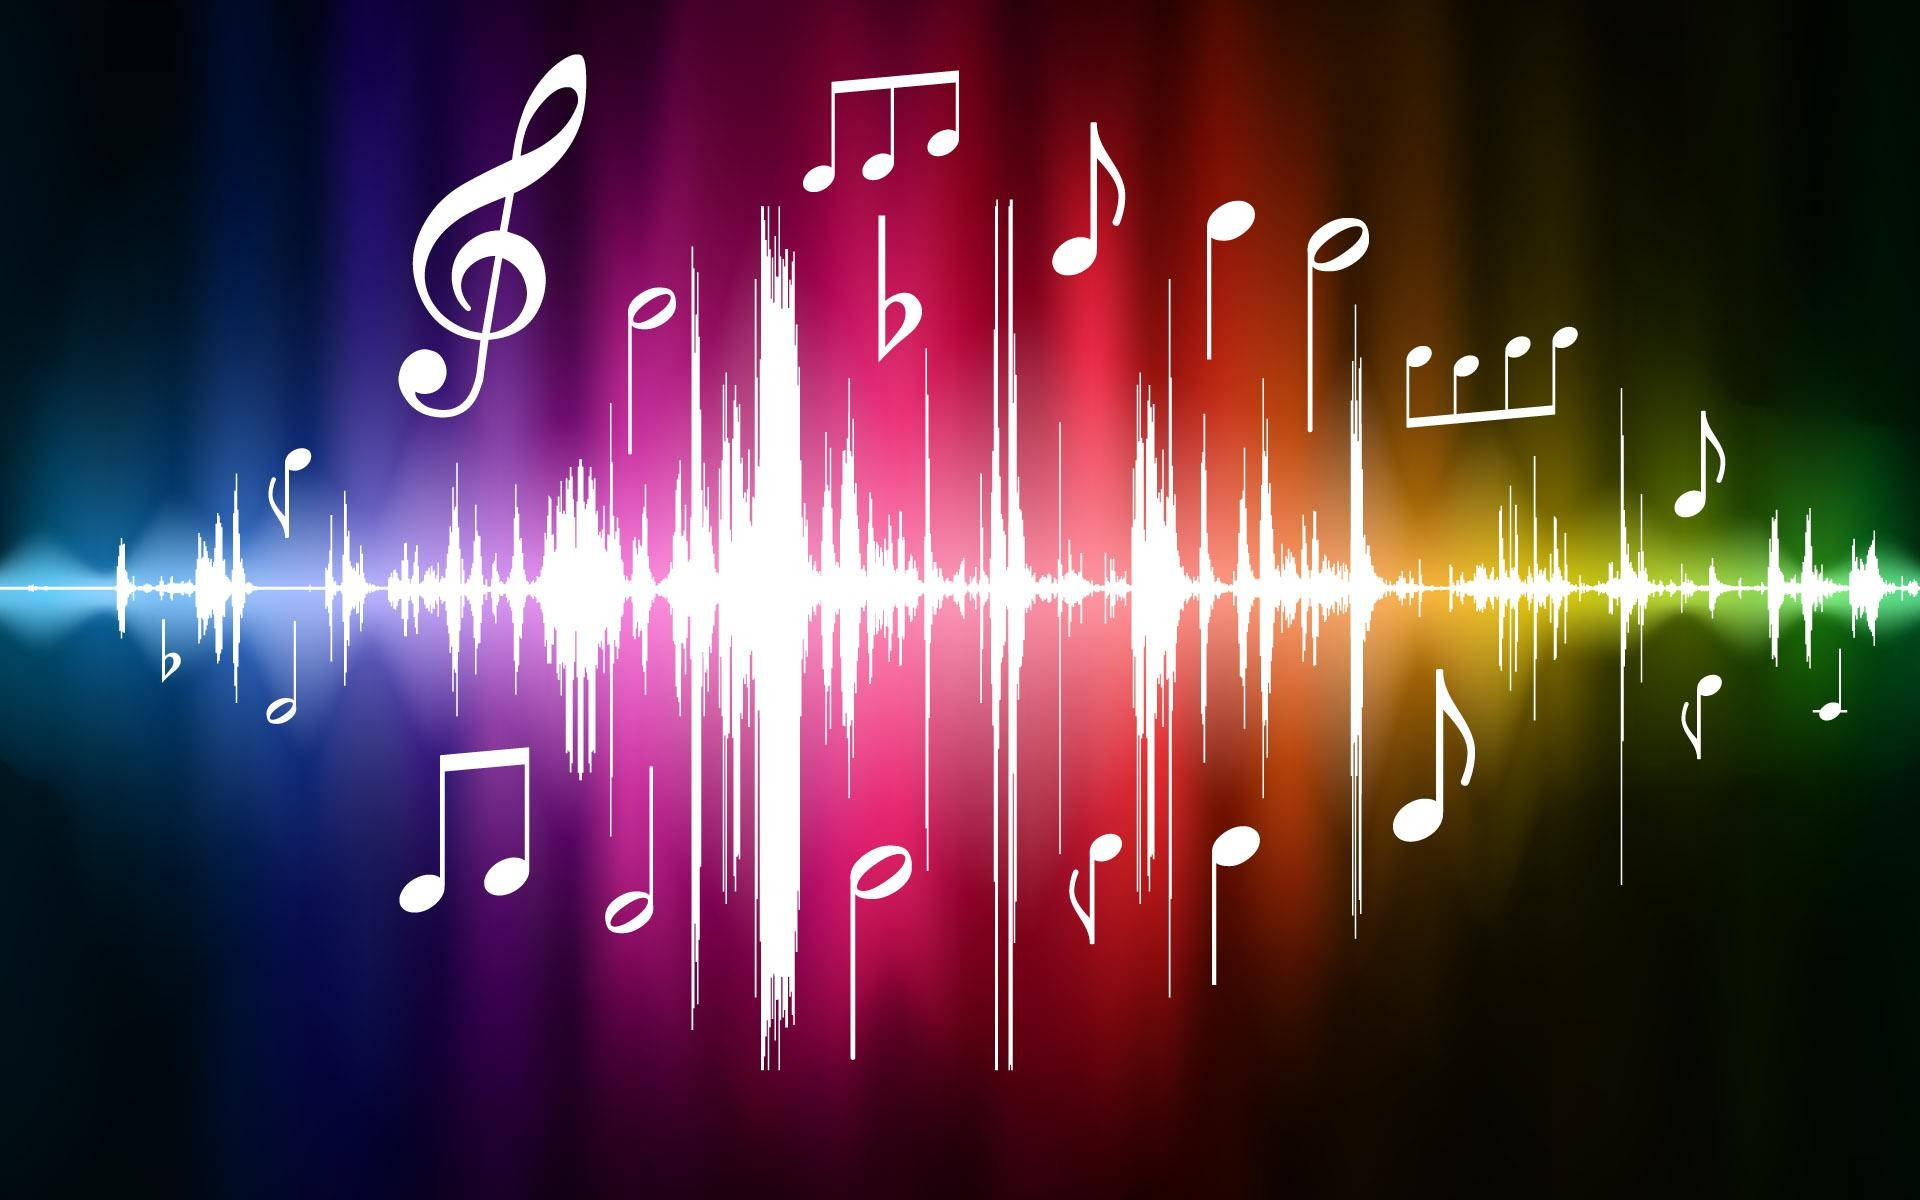 Cool Music Notes And Sound Waves Wallpaper